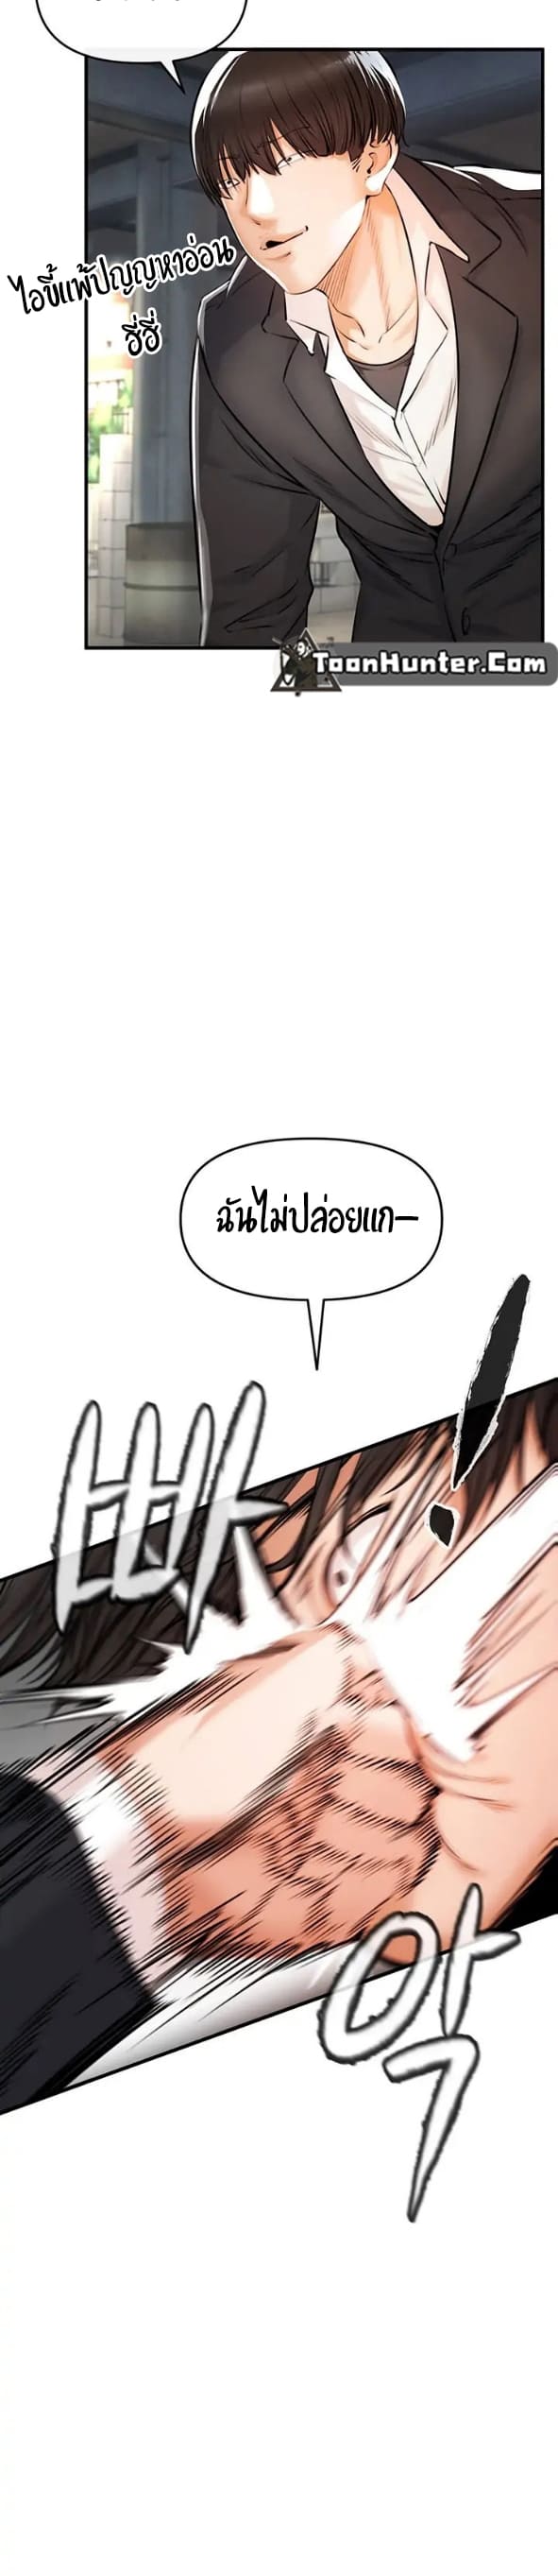 The Real Deal ตอนที่ 1 ภาพ 55